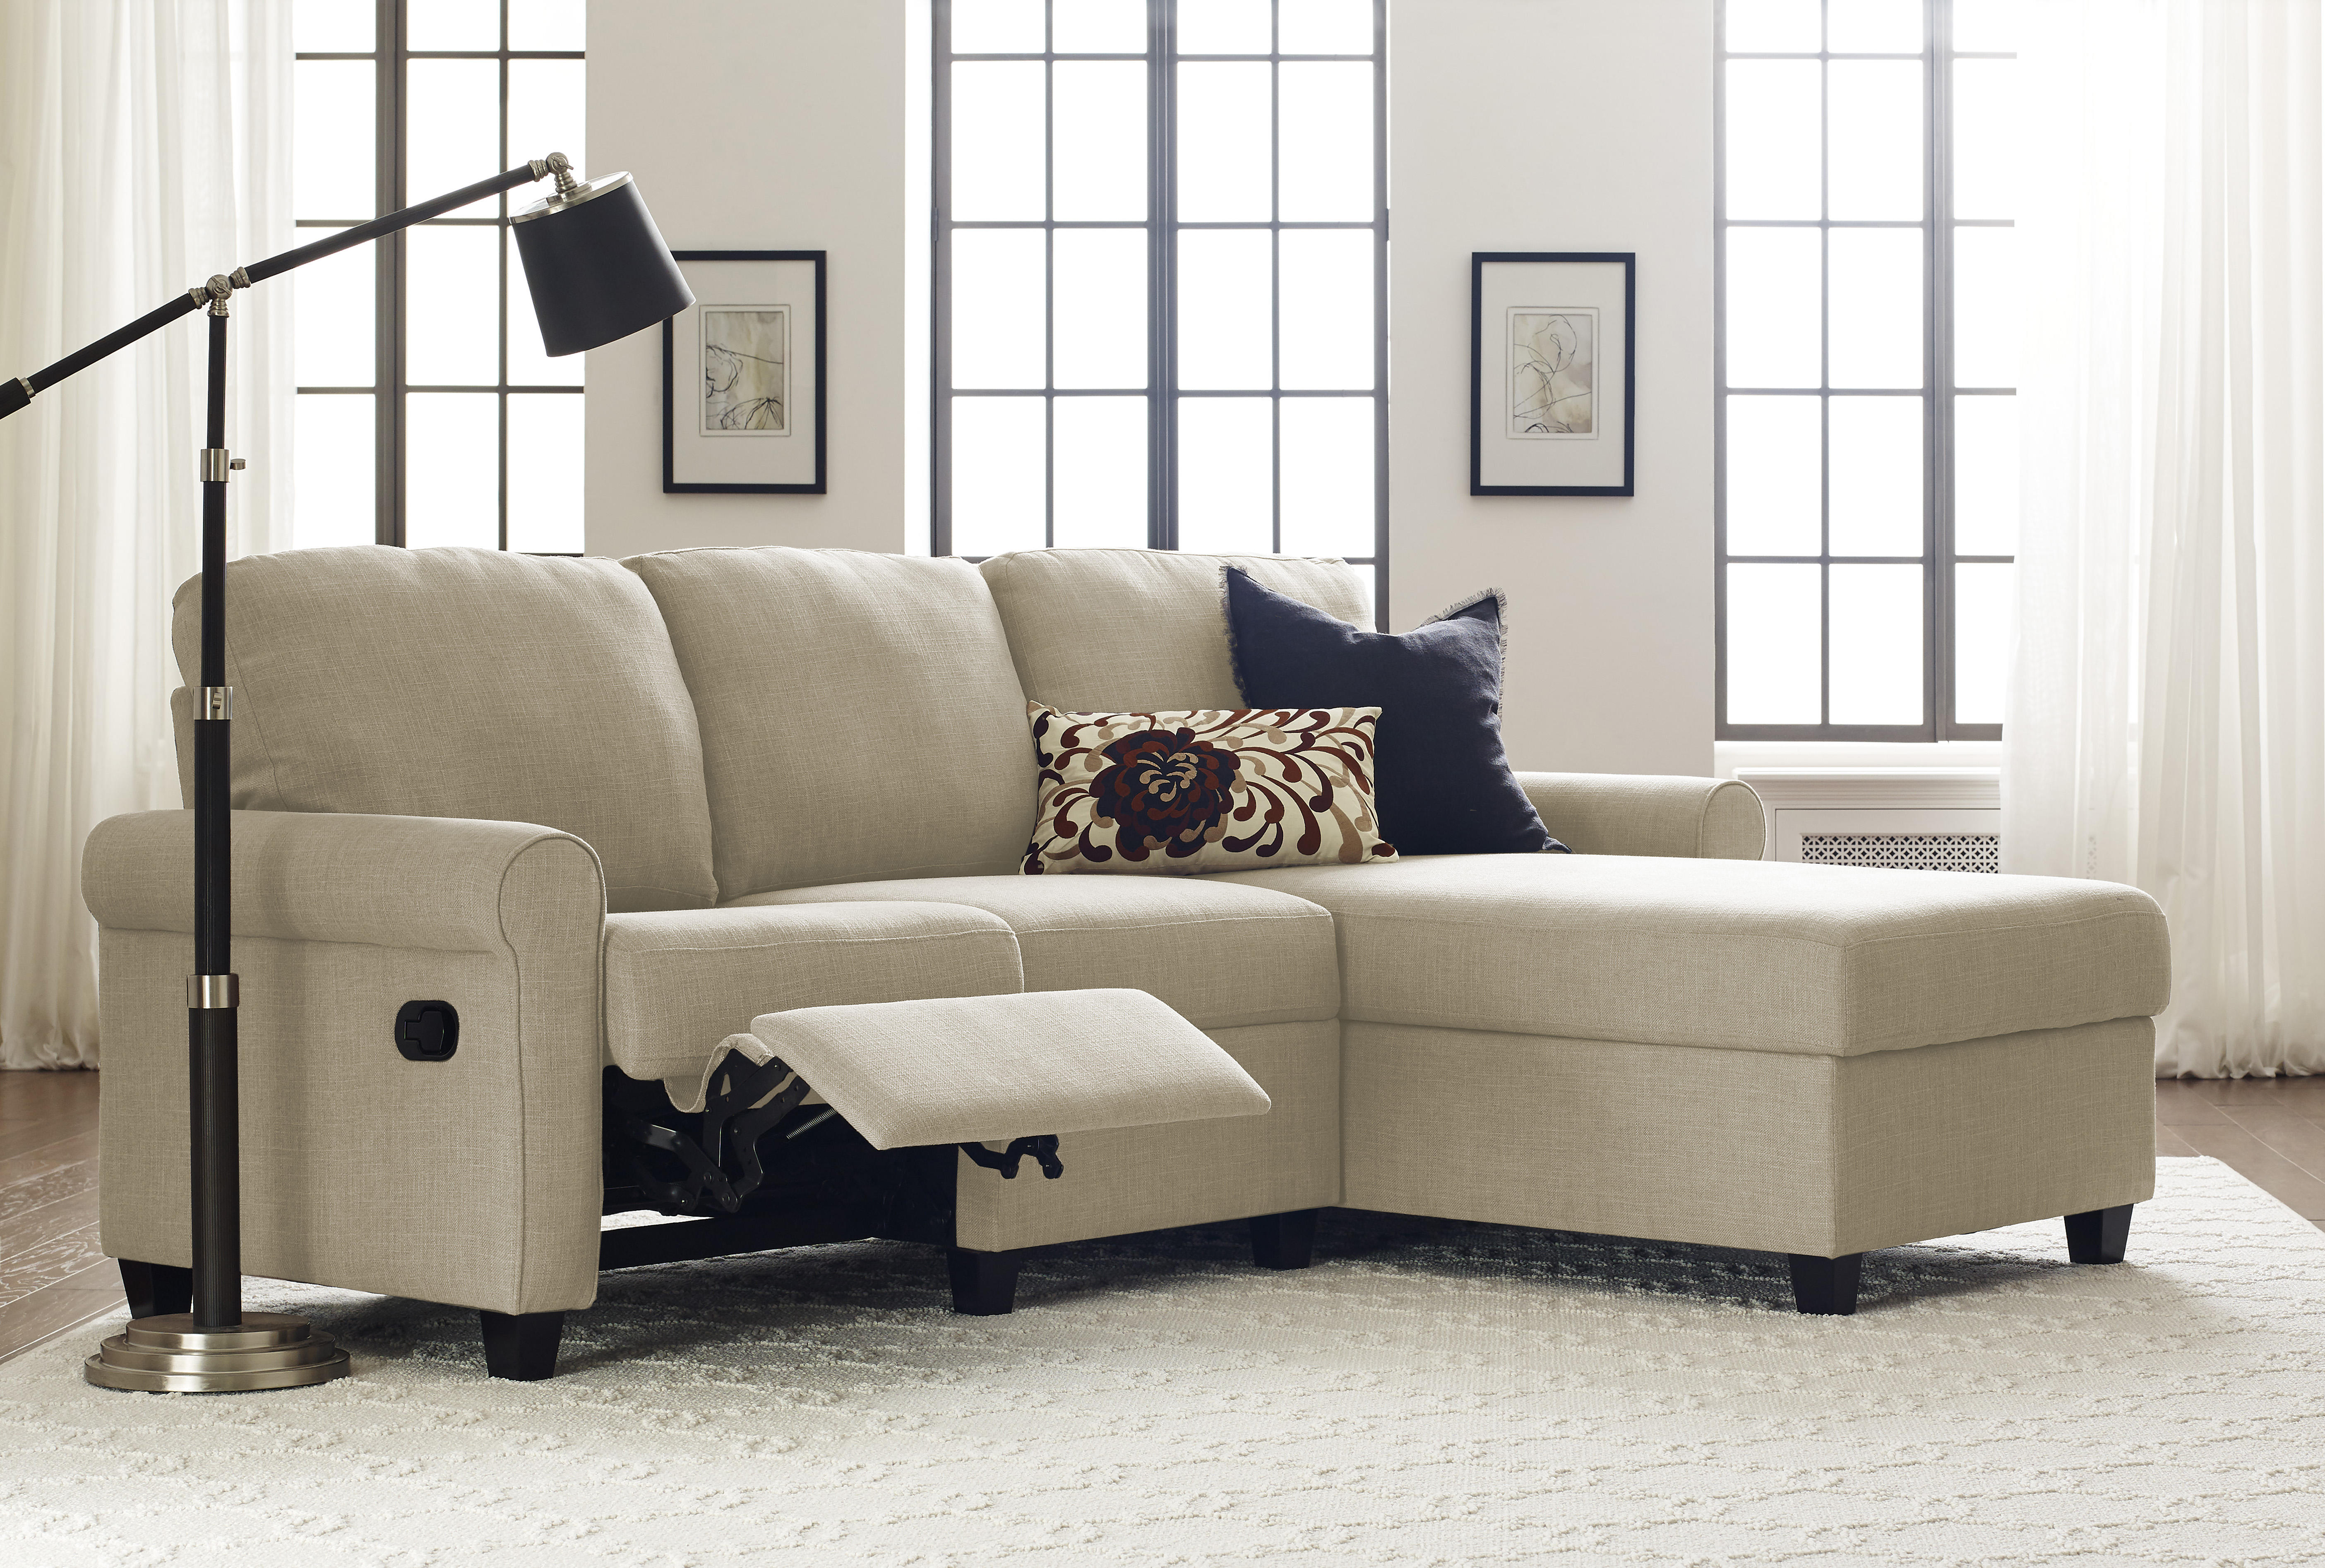 Serta Copenhagen Reclining Sectional with Right Storage Chaise - Oatmeal - image 1 of 9